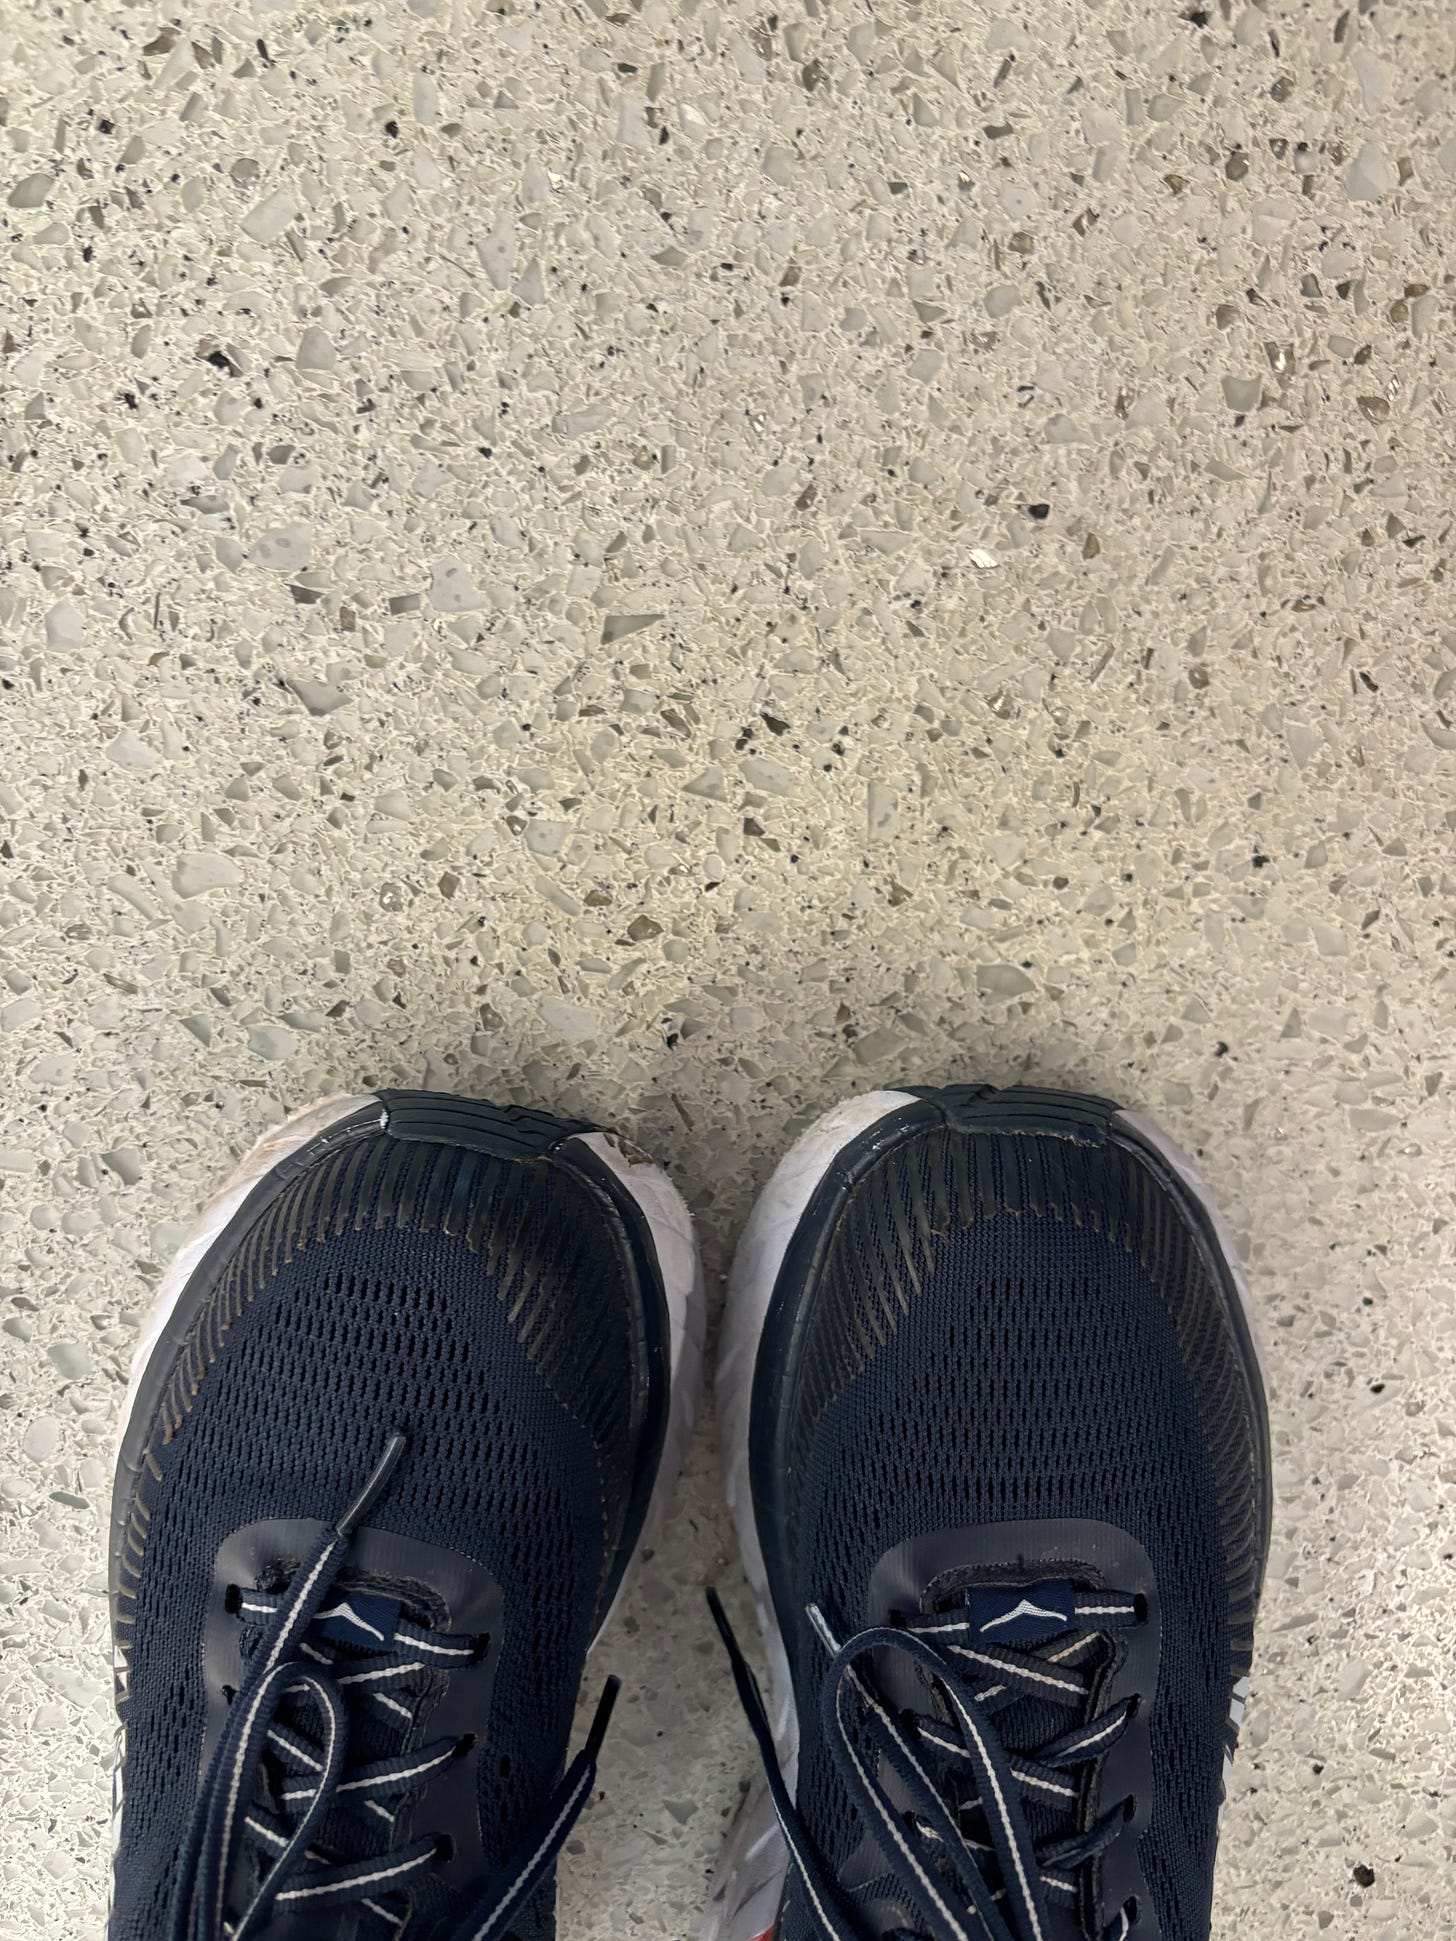 The author’s hoka sneakers side by side on her feet on a laminate floor